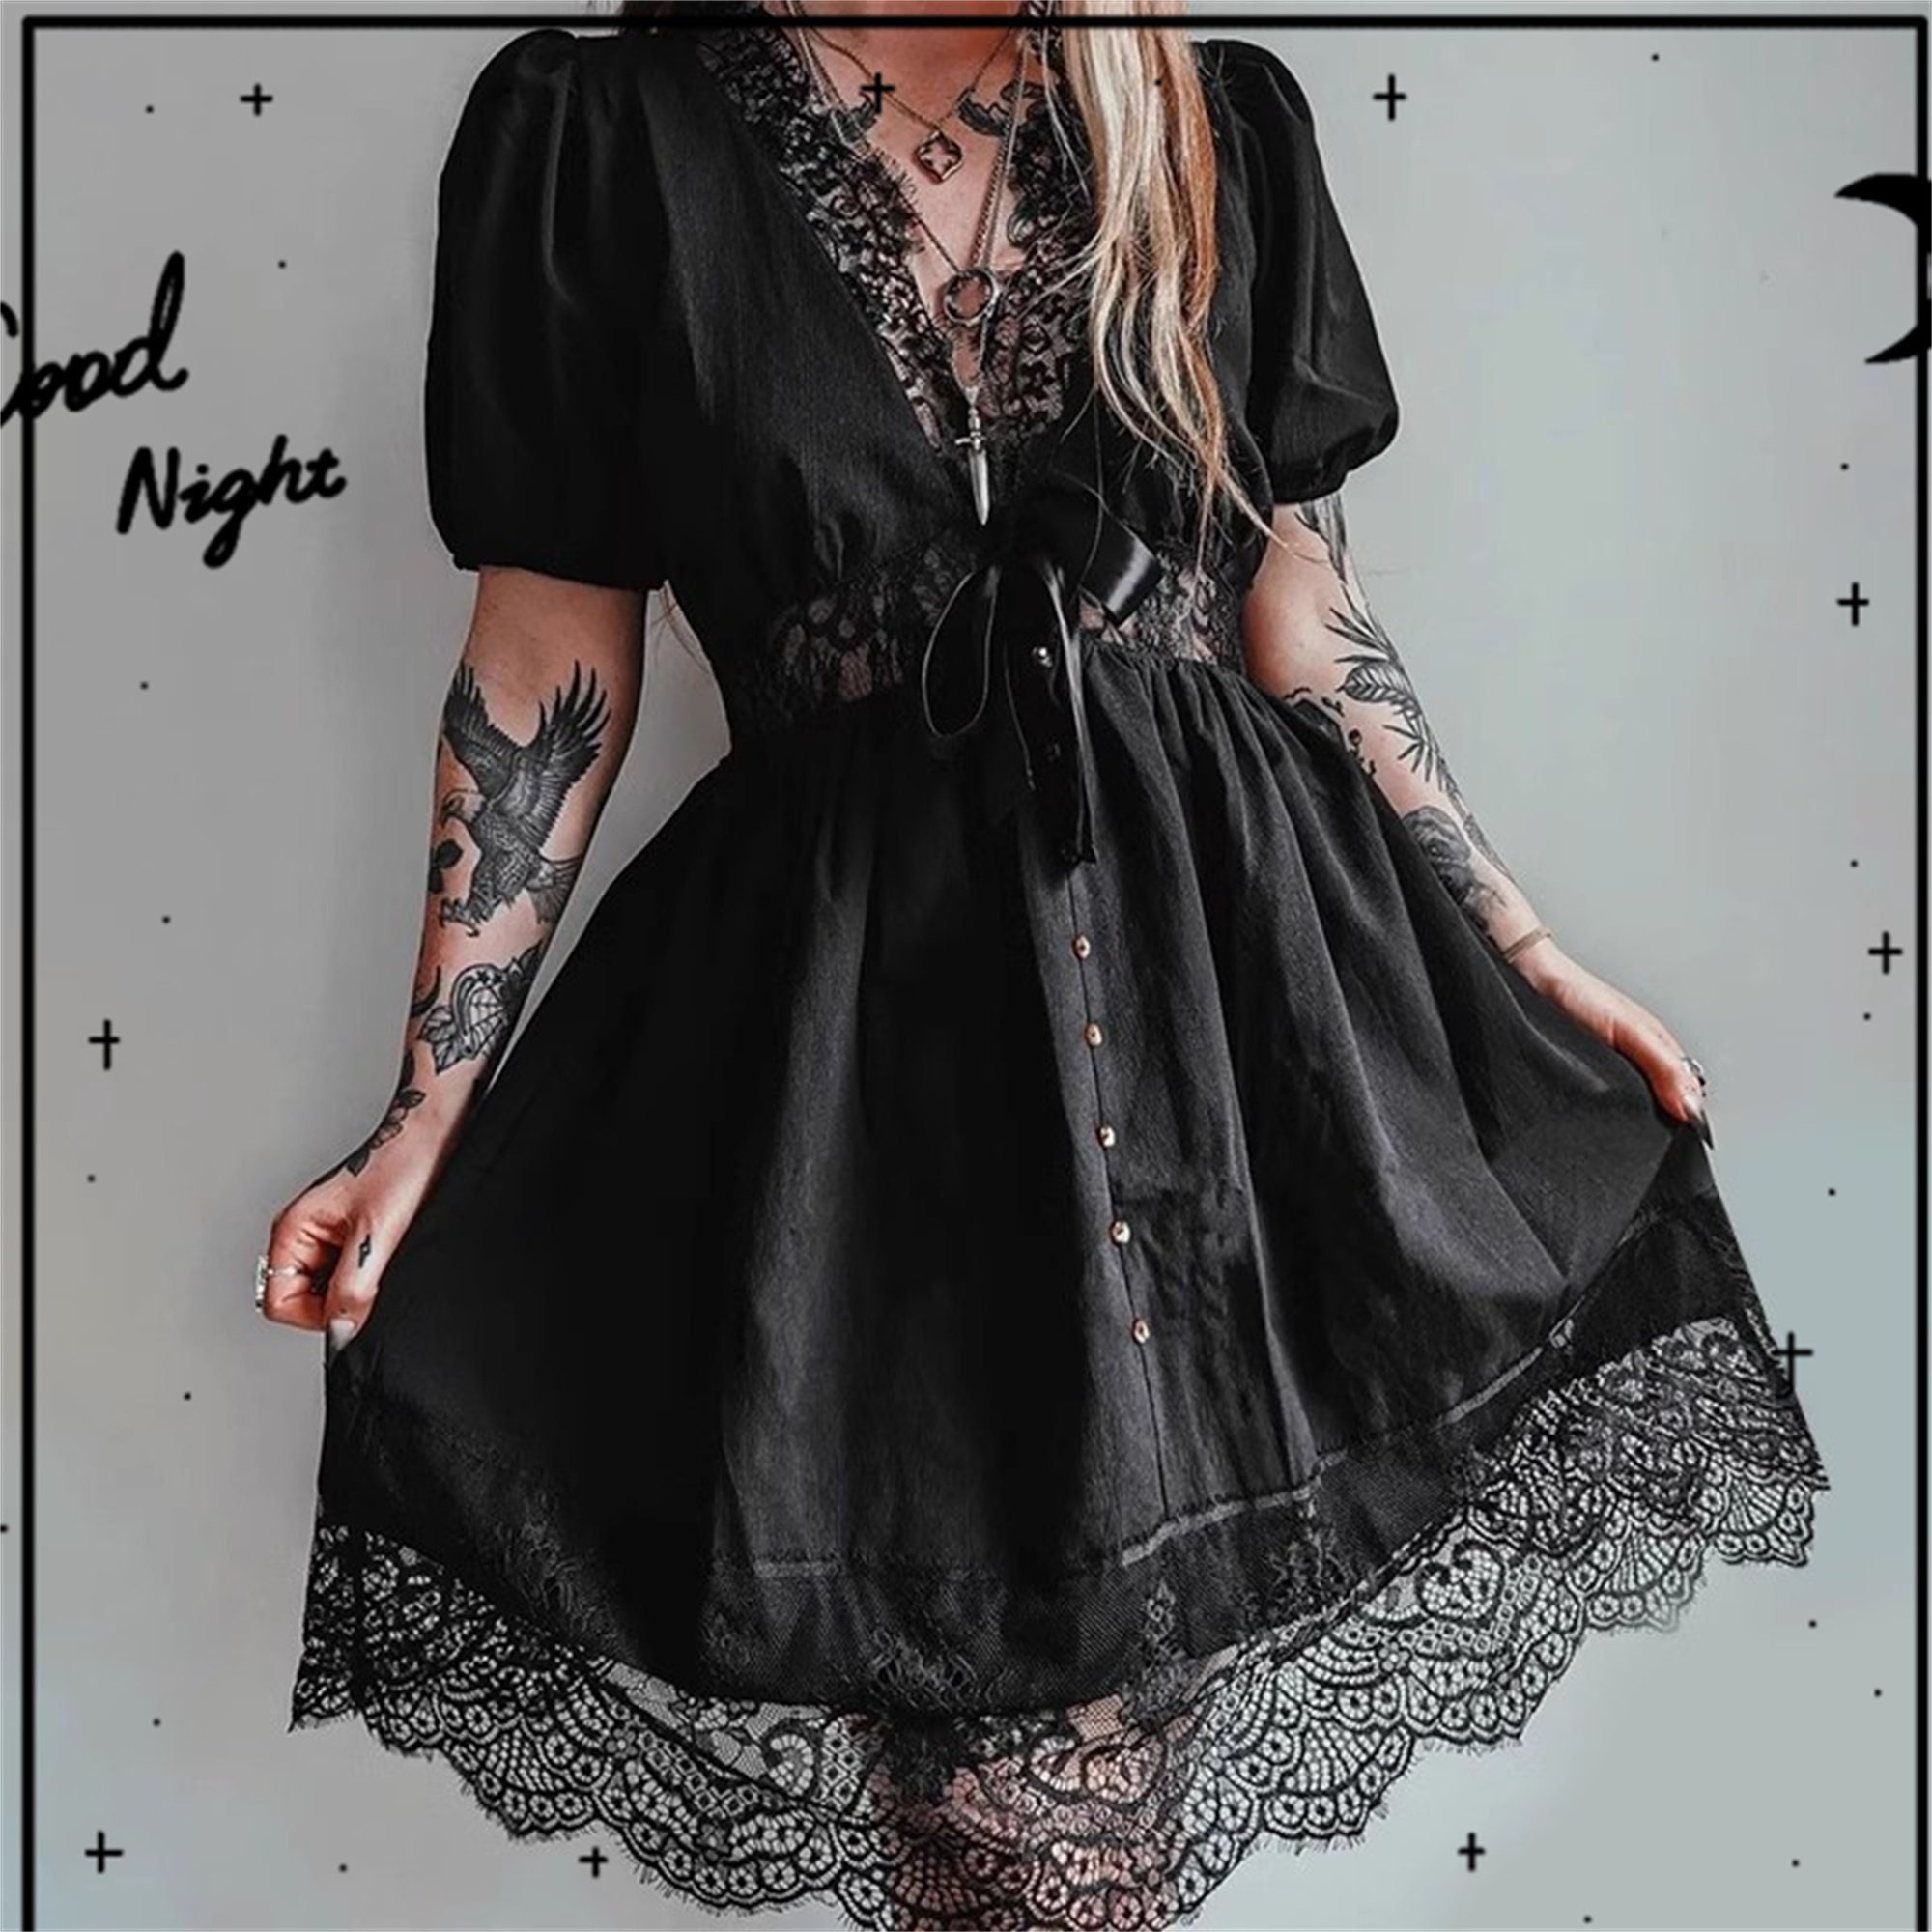 Gothic Lace Bubble Sleeve Dress - Elegant and High Waist Prom Dress